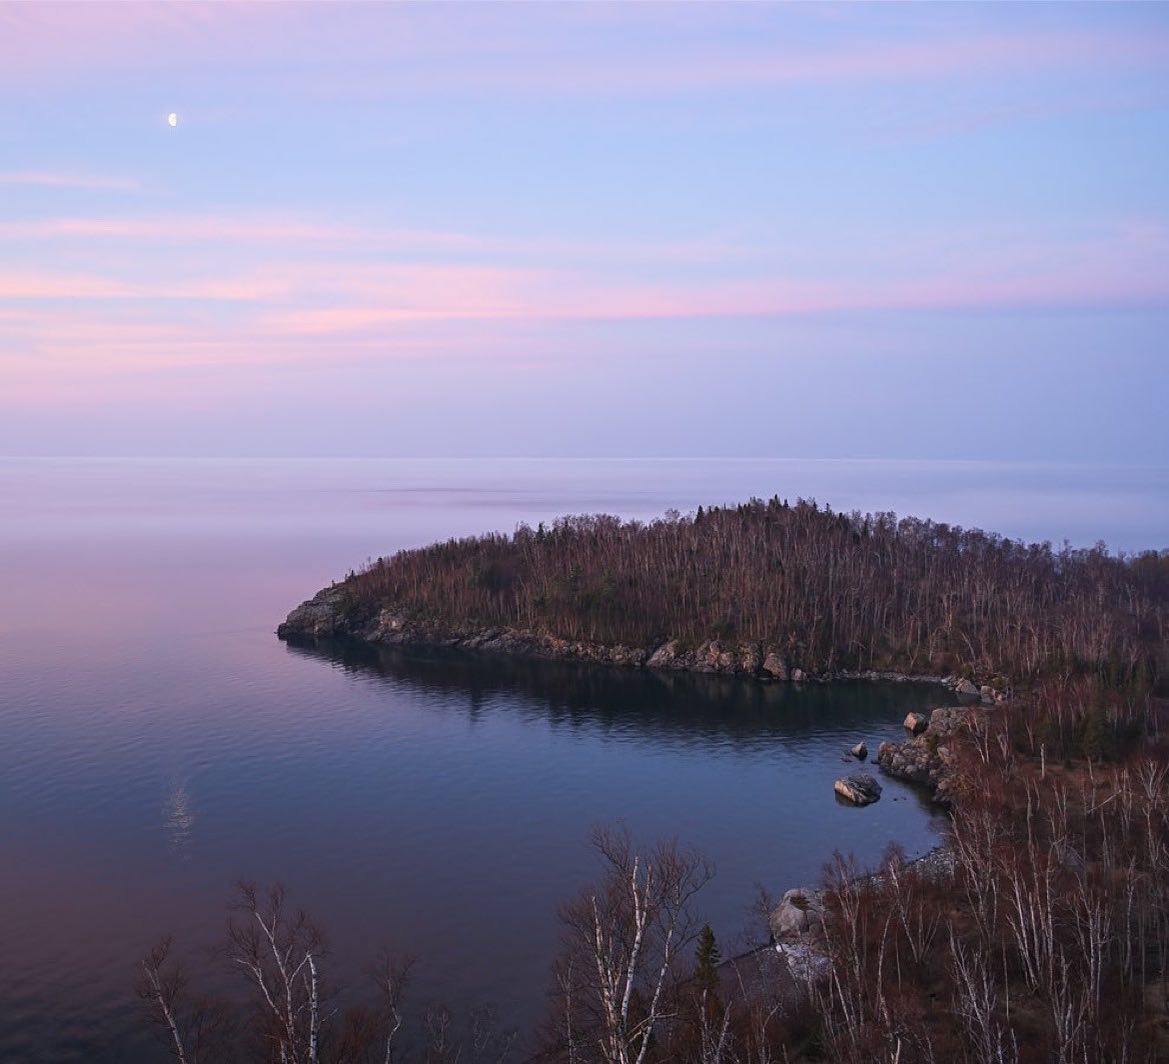 Gorgeous shot by @colin.willemsen•“In a Dream” (2023)In the tranquil embrace of a misty morning, the air hung heavy with humidity and the moon watched from above. These moments from a recent spring sunrise were fleeting but they will linger long in my memory.#mnupstream #upstream #minnesota #exploremn #northshore — from Instagram